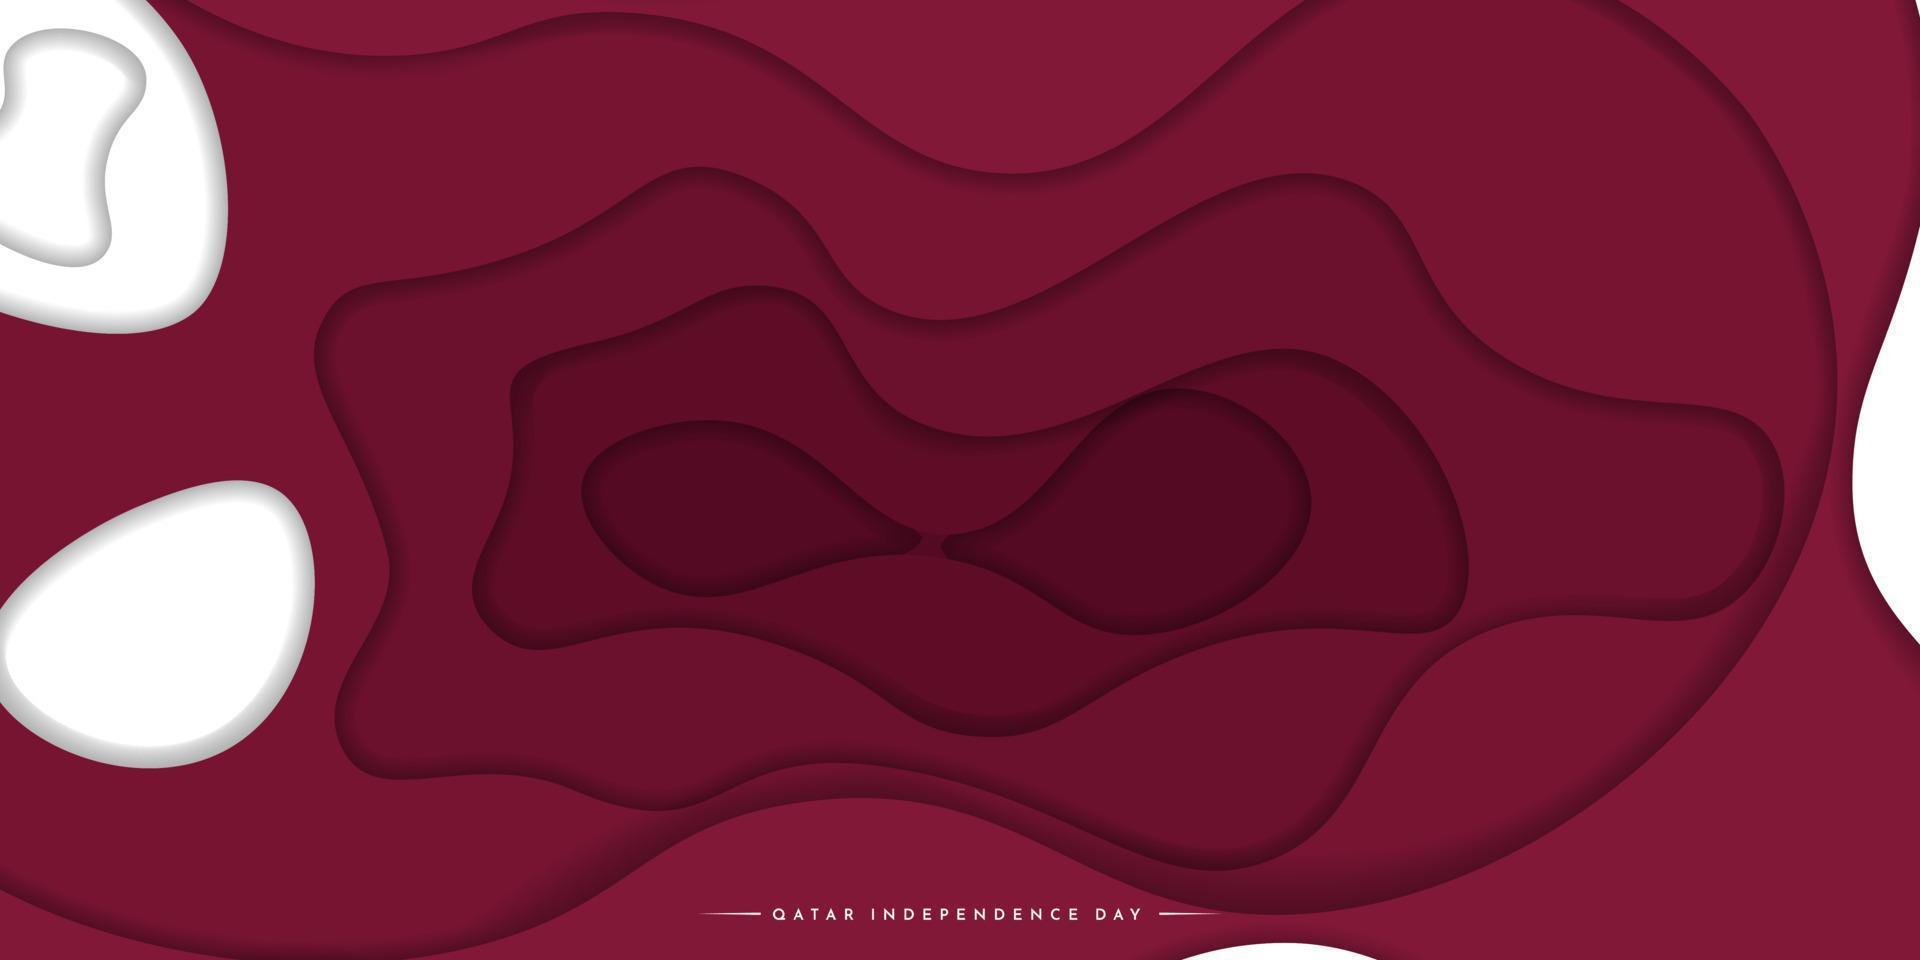 Maroon paper cut background design. Qatar independence day template design. vector